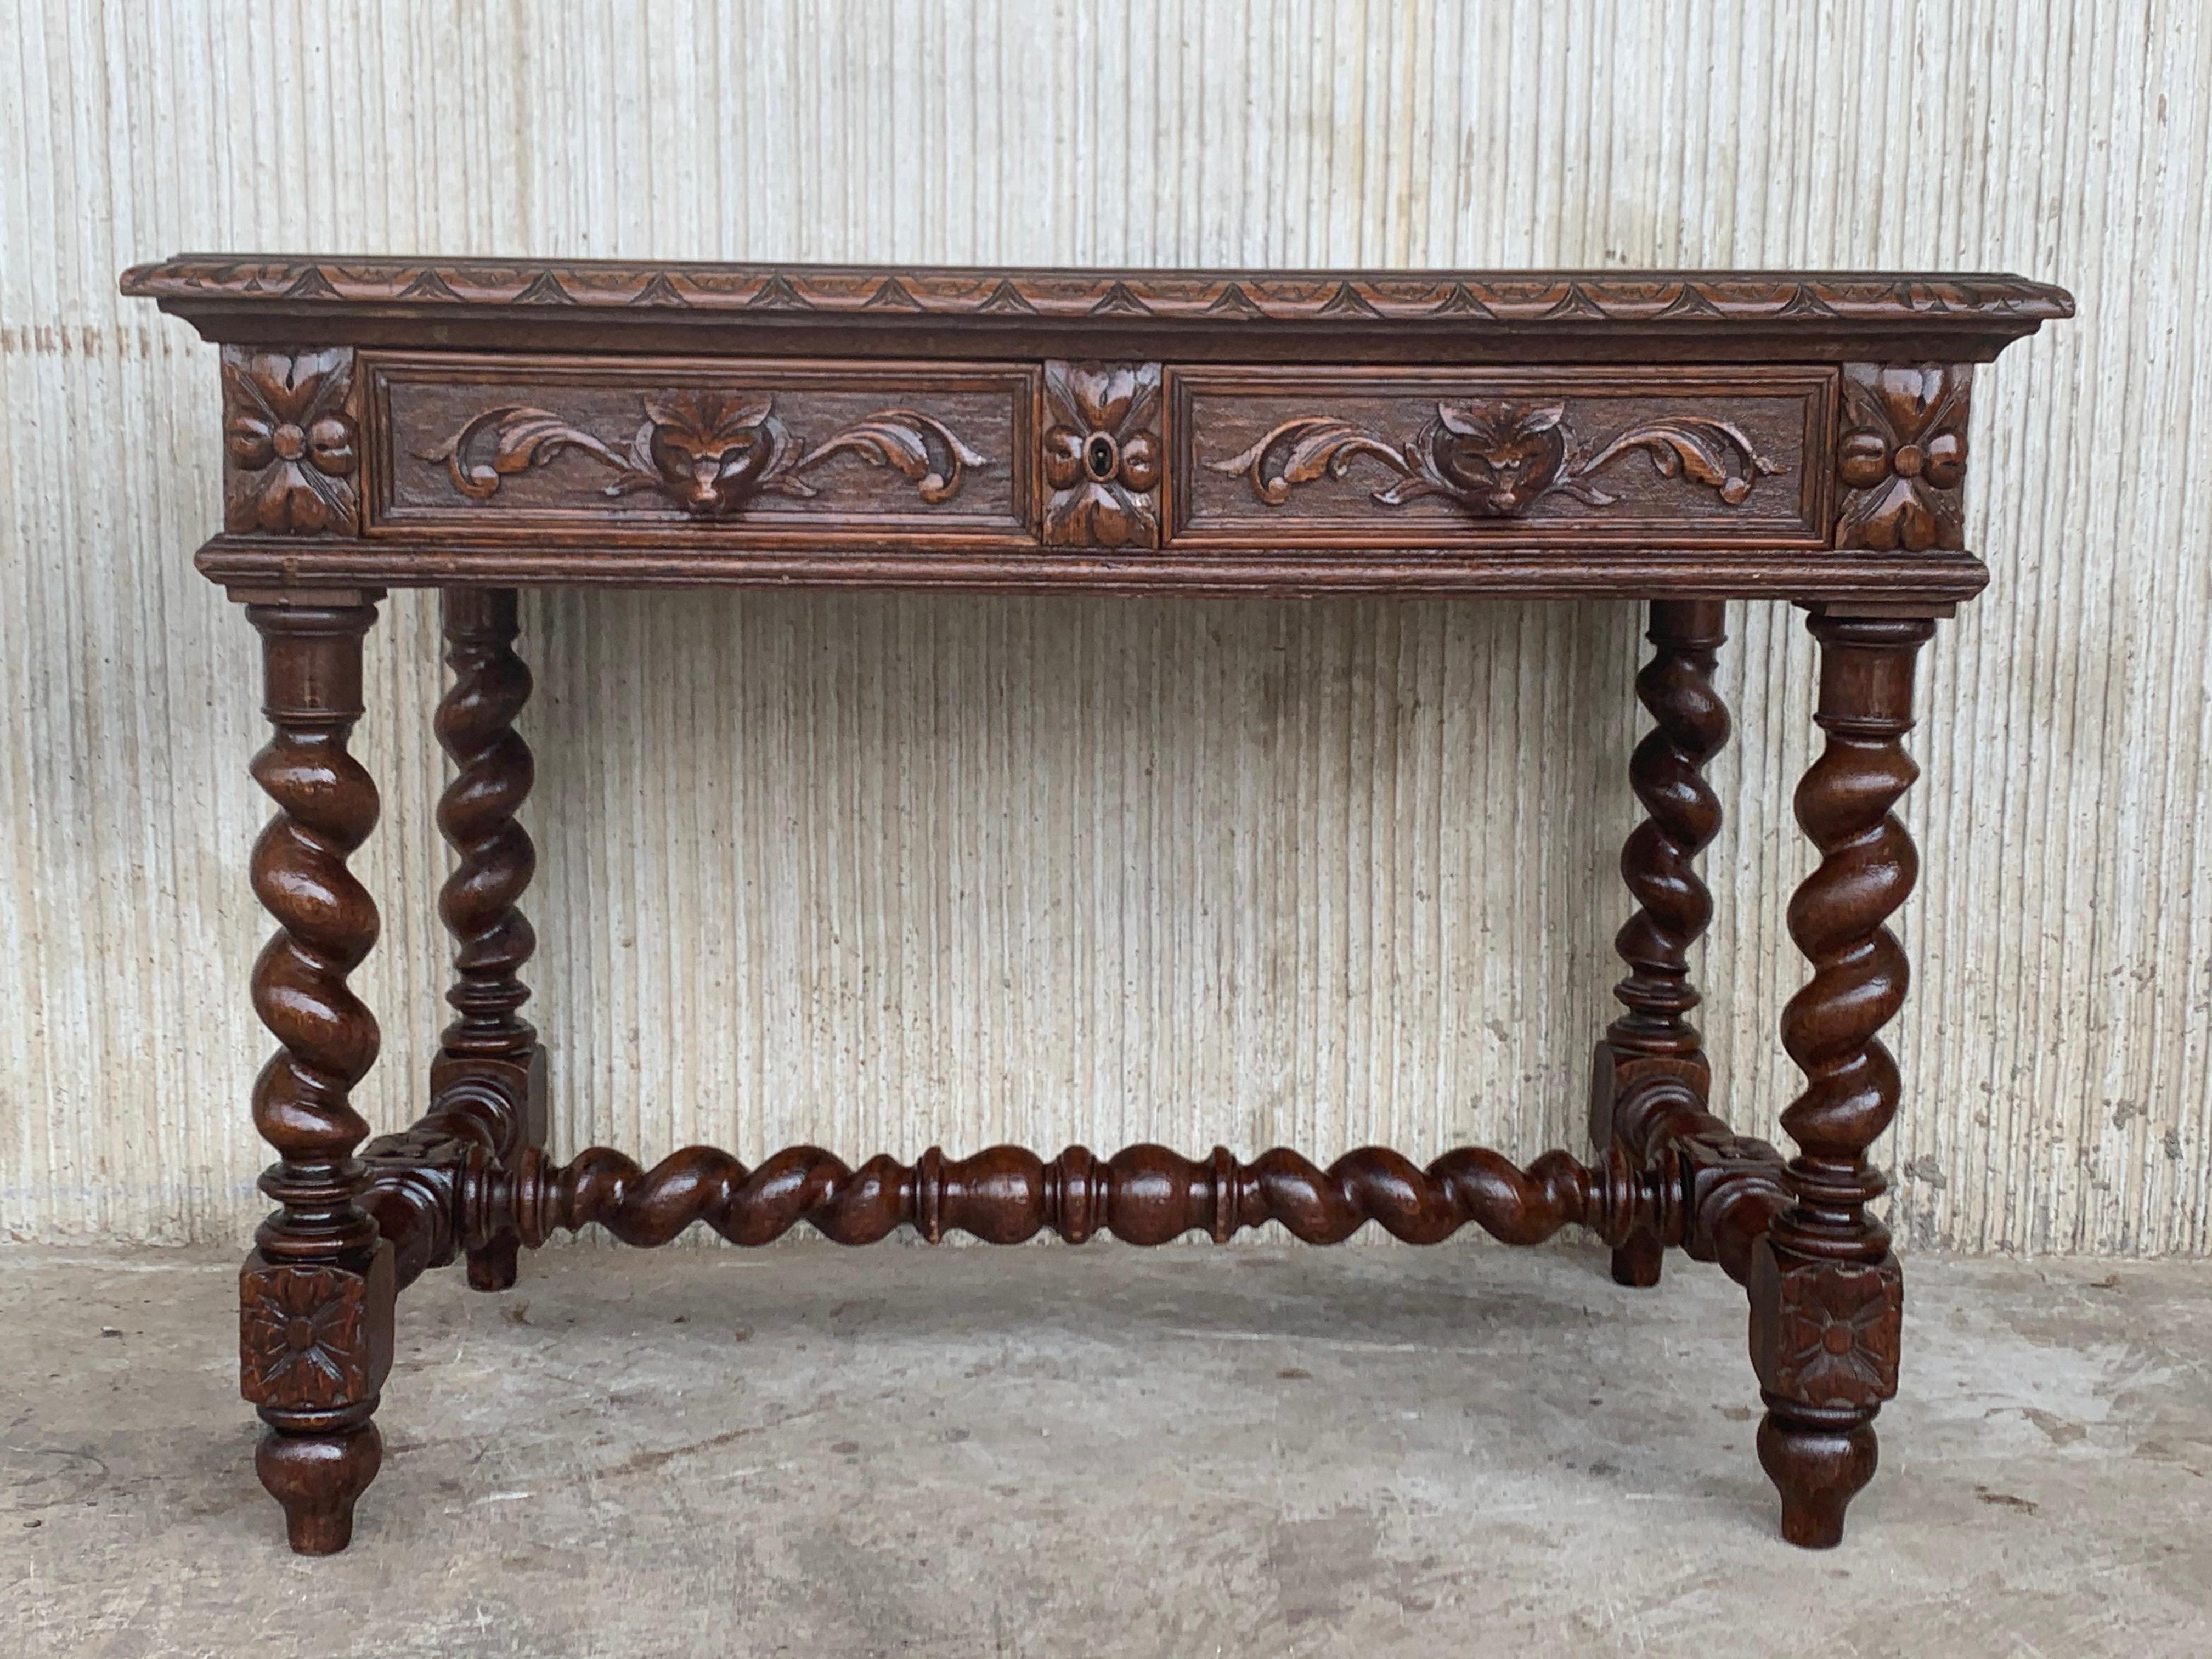 19th Spanish walnut desk with two drawers and solomonic turning legs and solomonic stretcher
it is carved in four sides
It has a central lock for both drawers and carved wood fox like a handles

Height to the floor to the drawers 25 in.
  